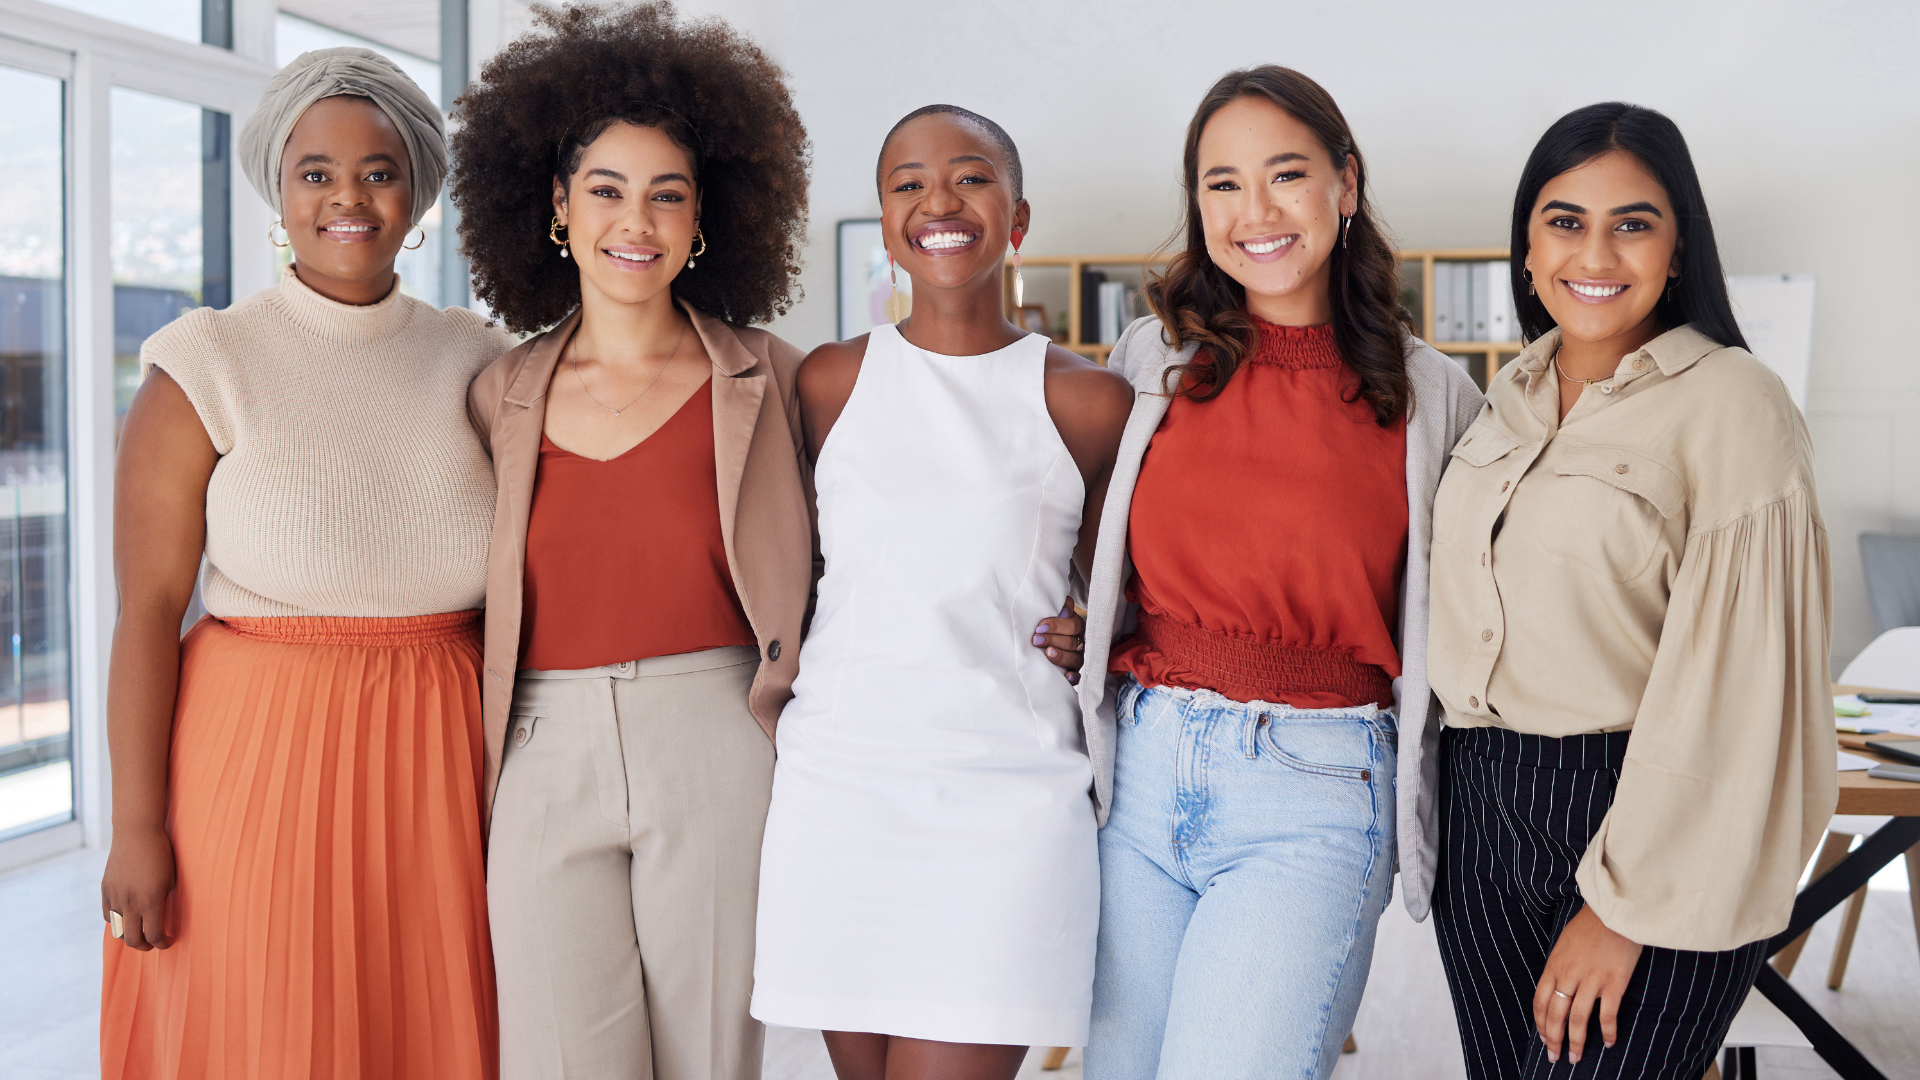 a group of diverse millennial moms and career pivoting women, standing together in unity, symbolizing support, empowerment, and the ripple effect of commitment. Evoking a sense of camaraderie, strength, and shared purpose.